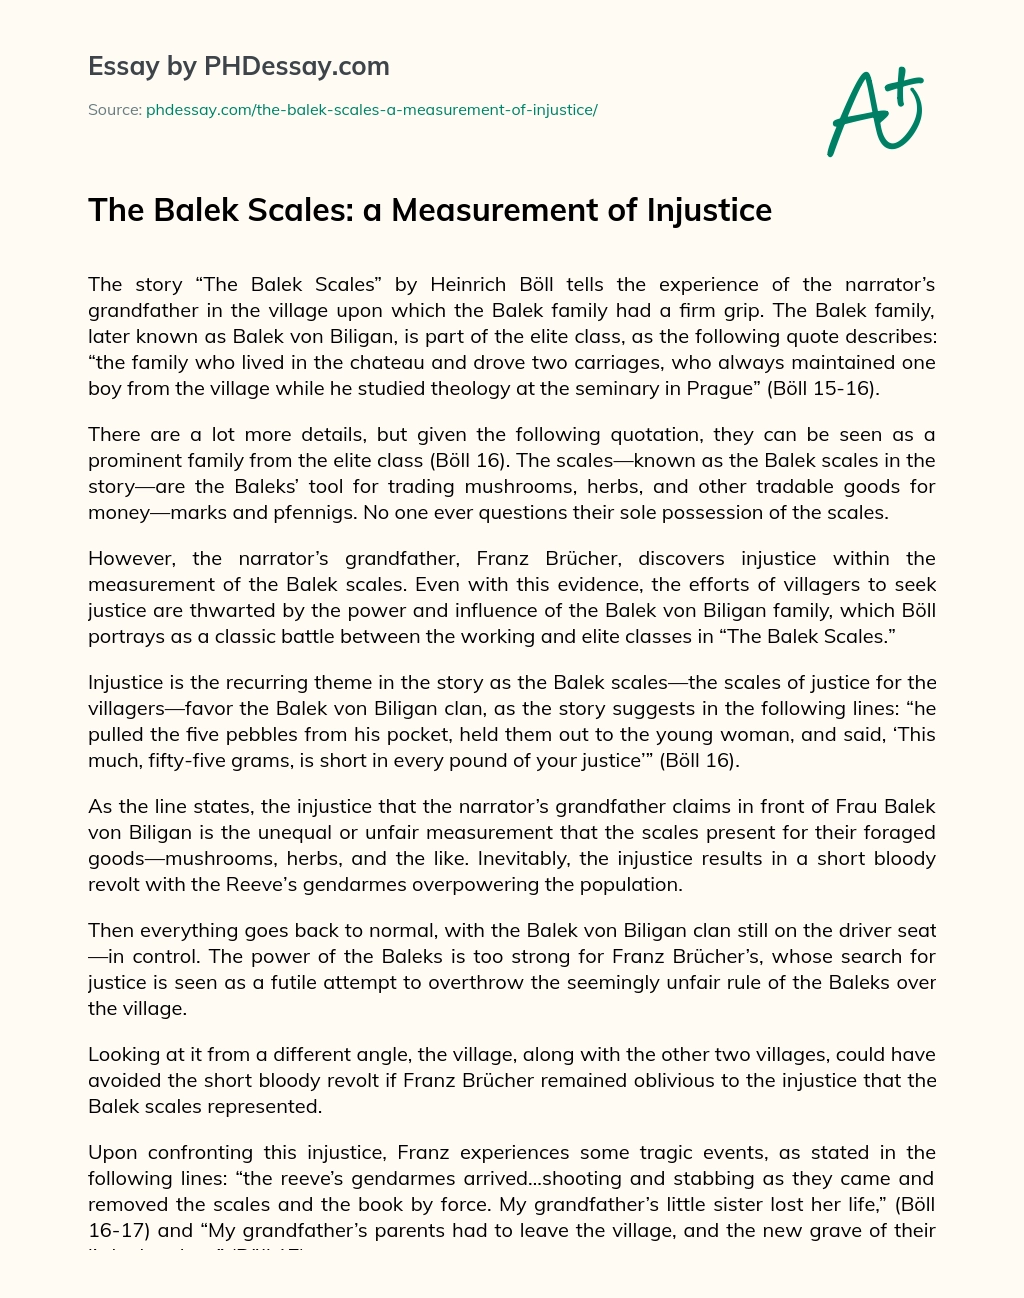 The Balek Scales: a Measurement of Injustice essay